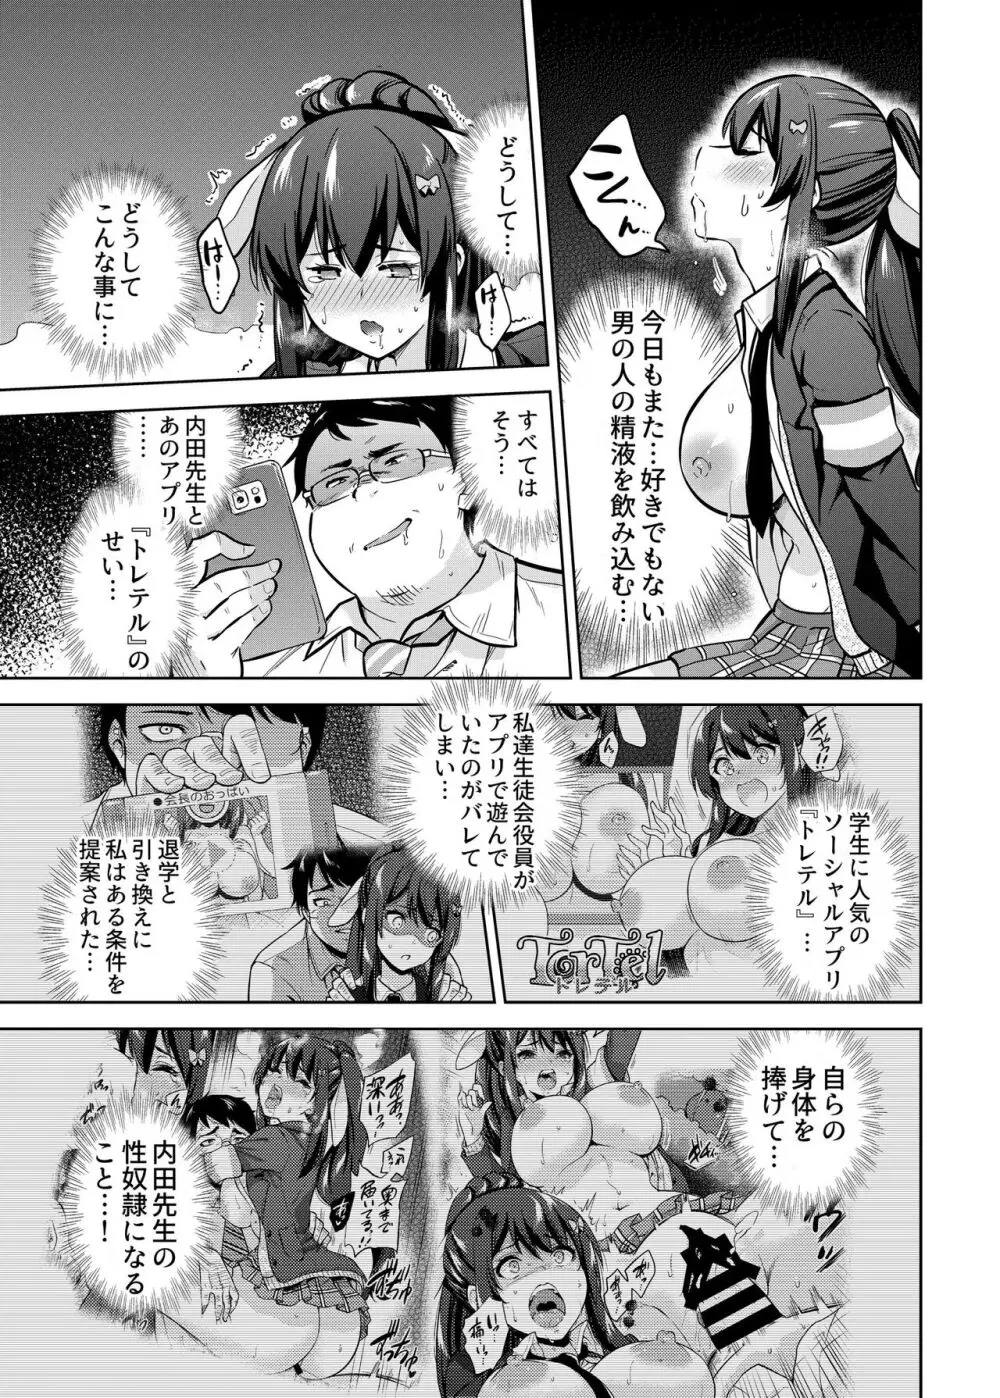 SNS 生徒会役員を寝撮ってシェアする話。2 - page6